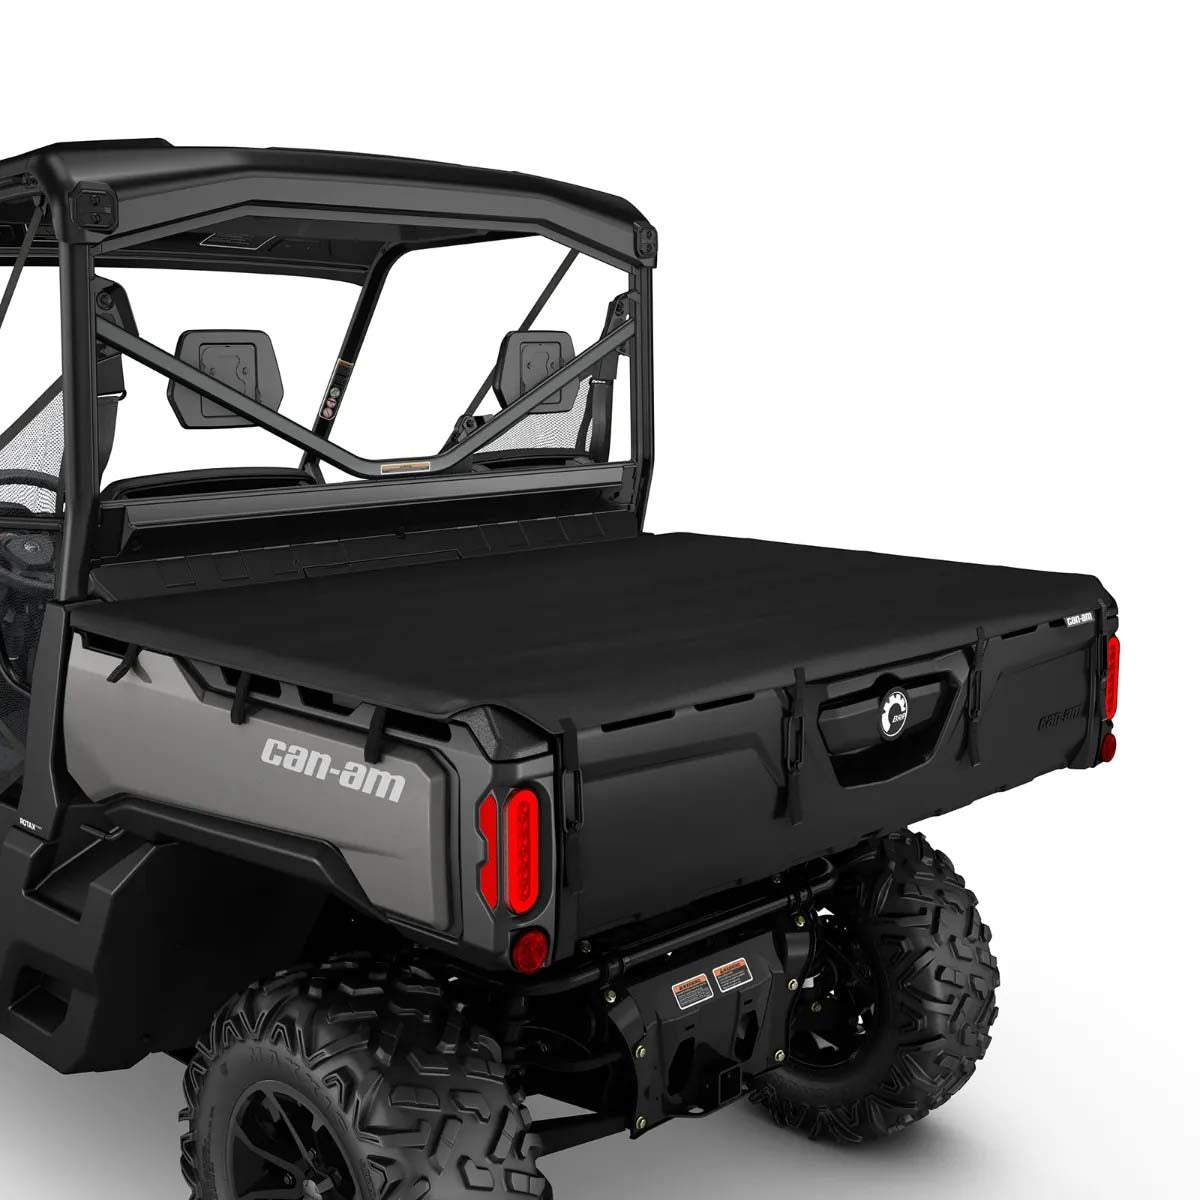 Can-Am Tonneau Cover - Defender 2018 & up 715008306